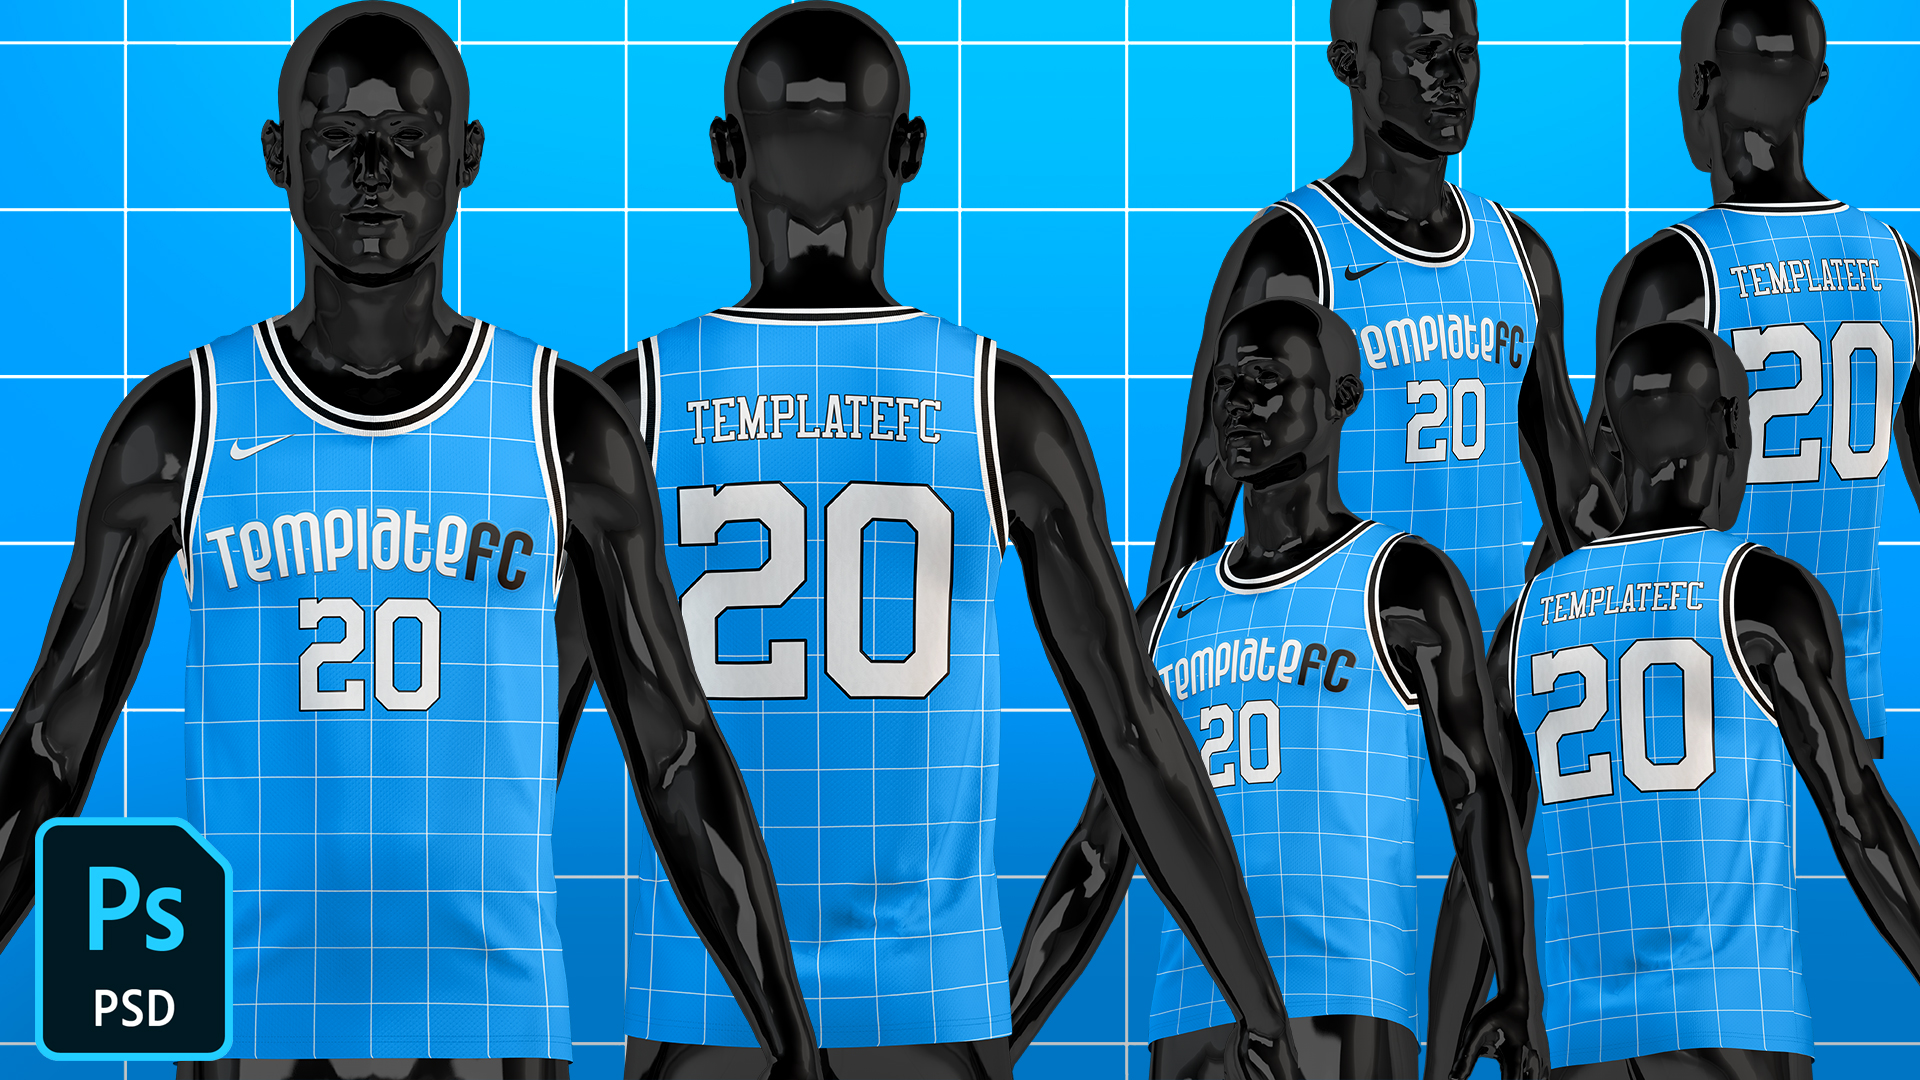 Basketball Jersey Mockup designs, themes, templates and